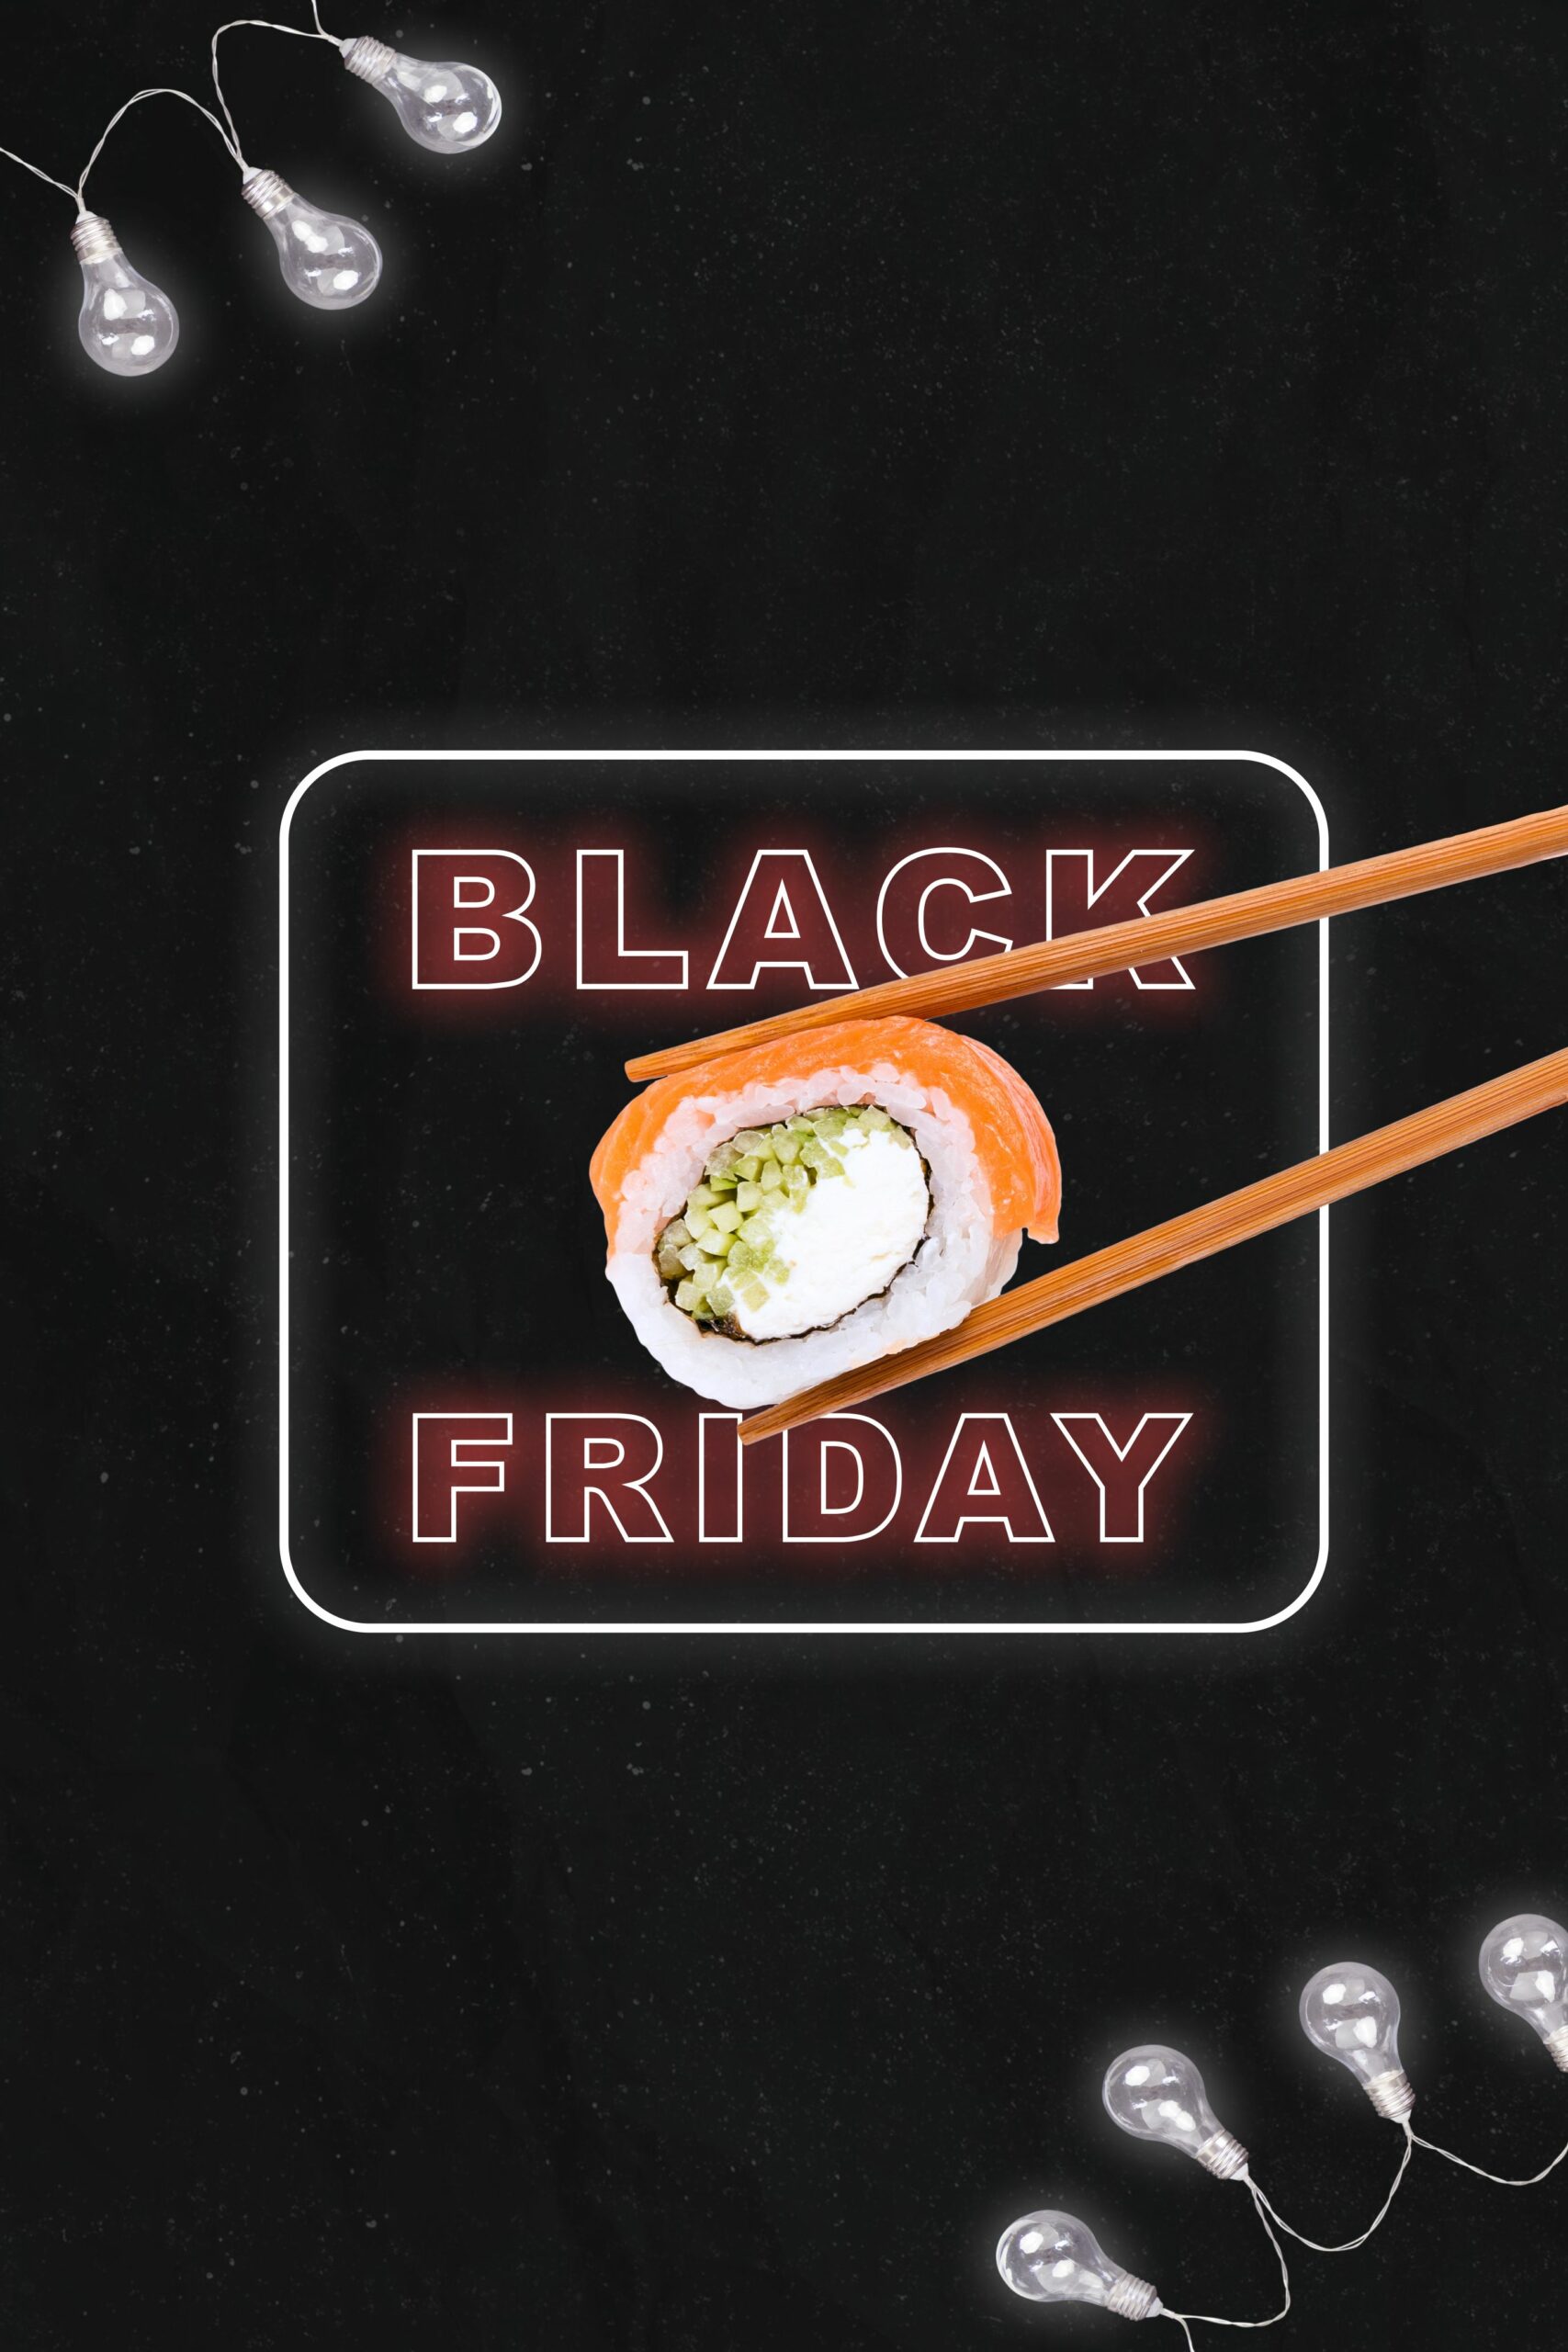 Black Friday Restaurant Deals: Attract More Customers with Cost